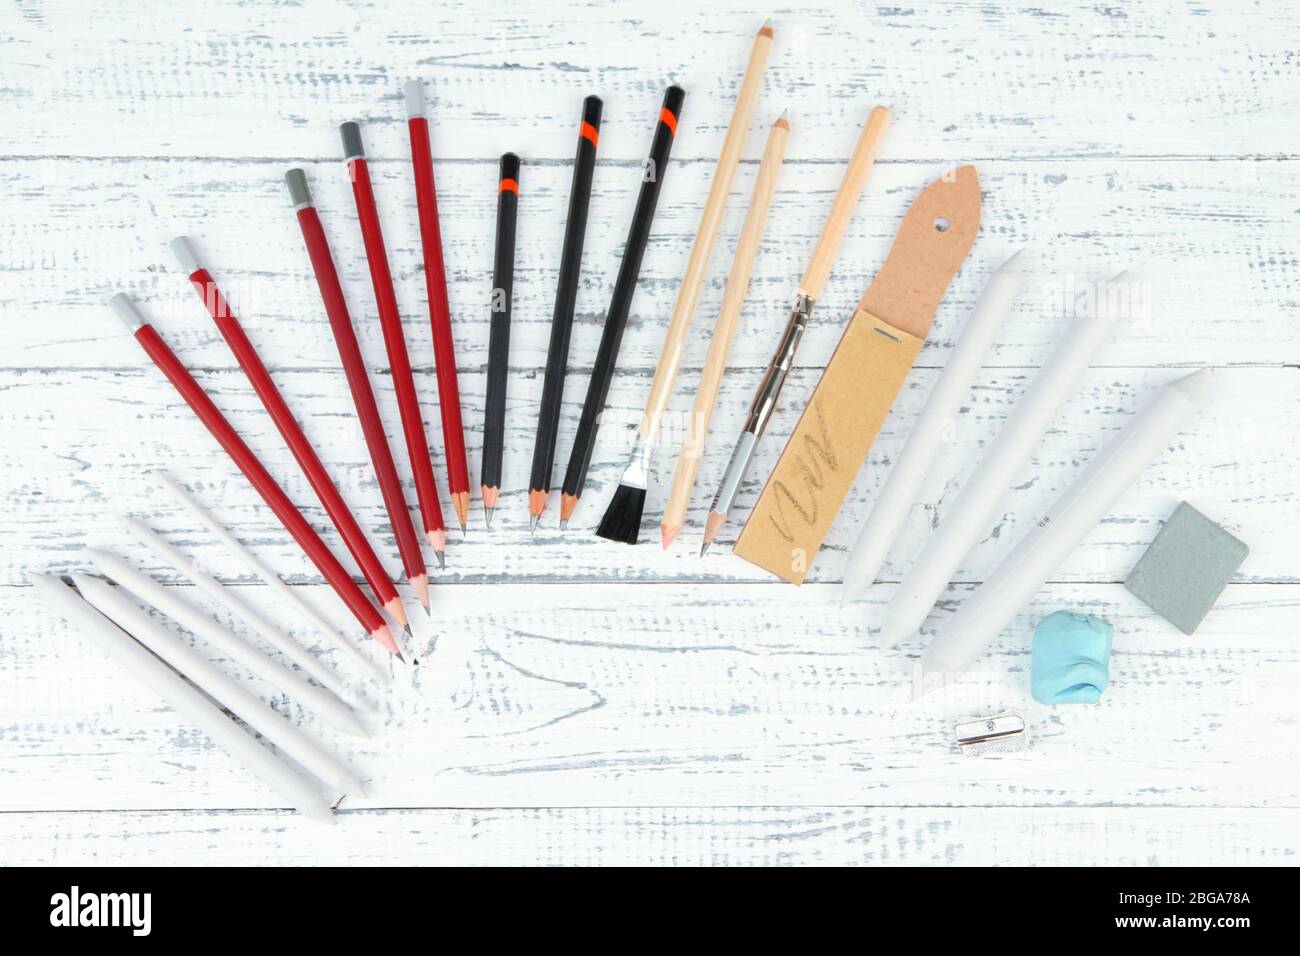 Professional art materials, on wooden table Stock Photo